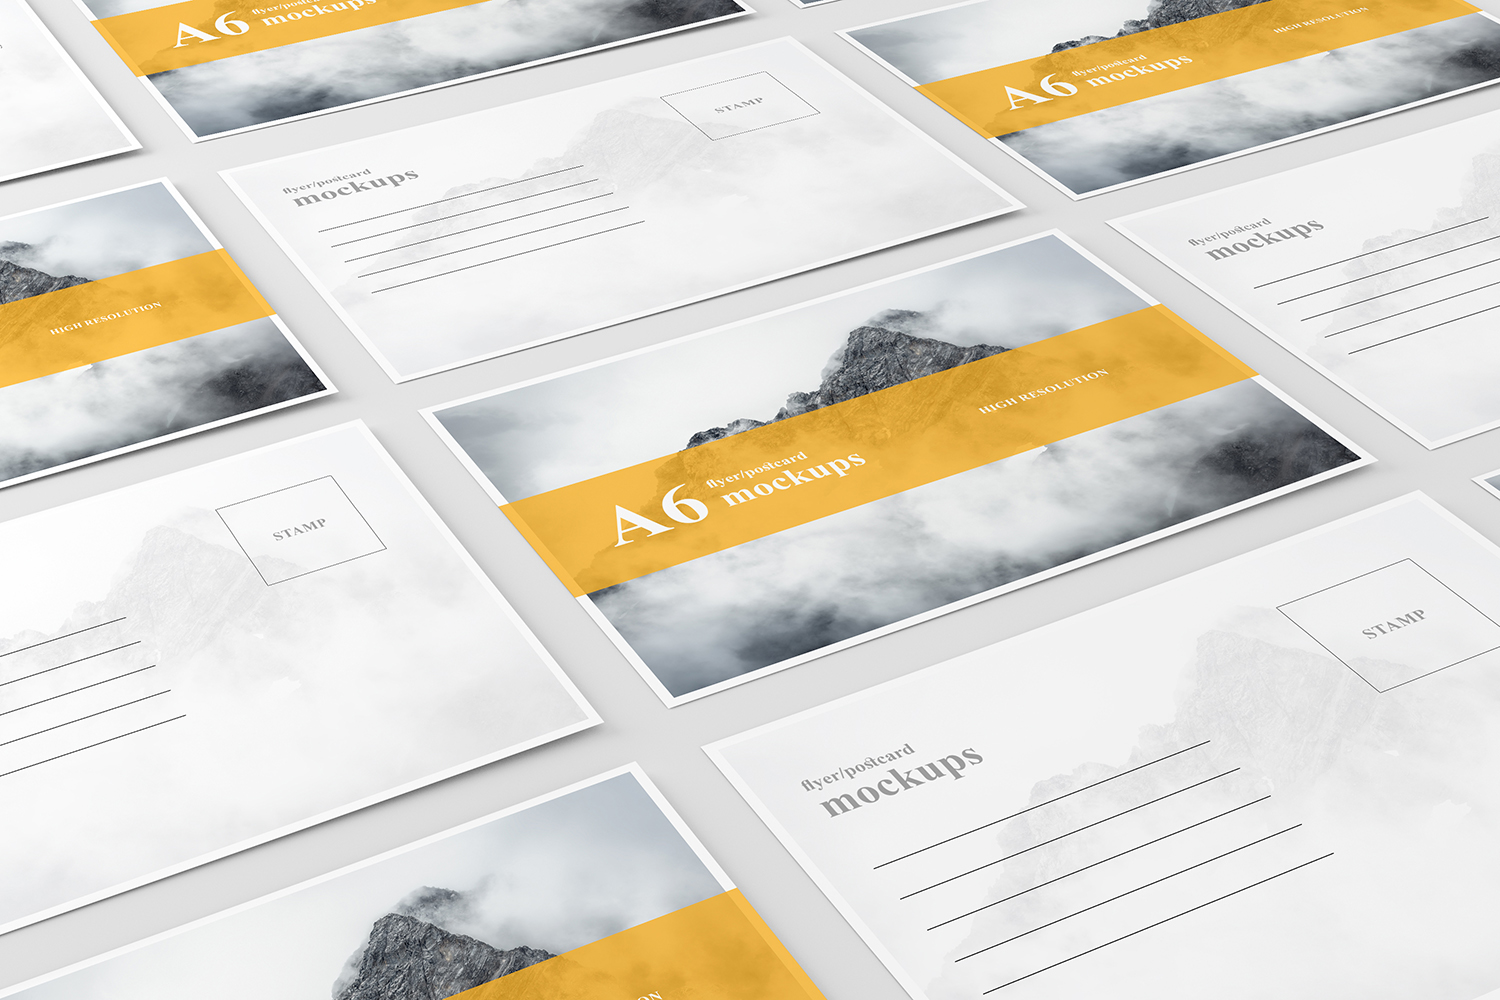 Download A6 Flyer / Postcard Mock-Up by ToaSin Studio on Dribbble